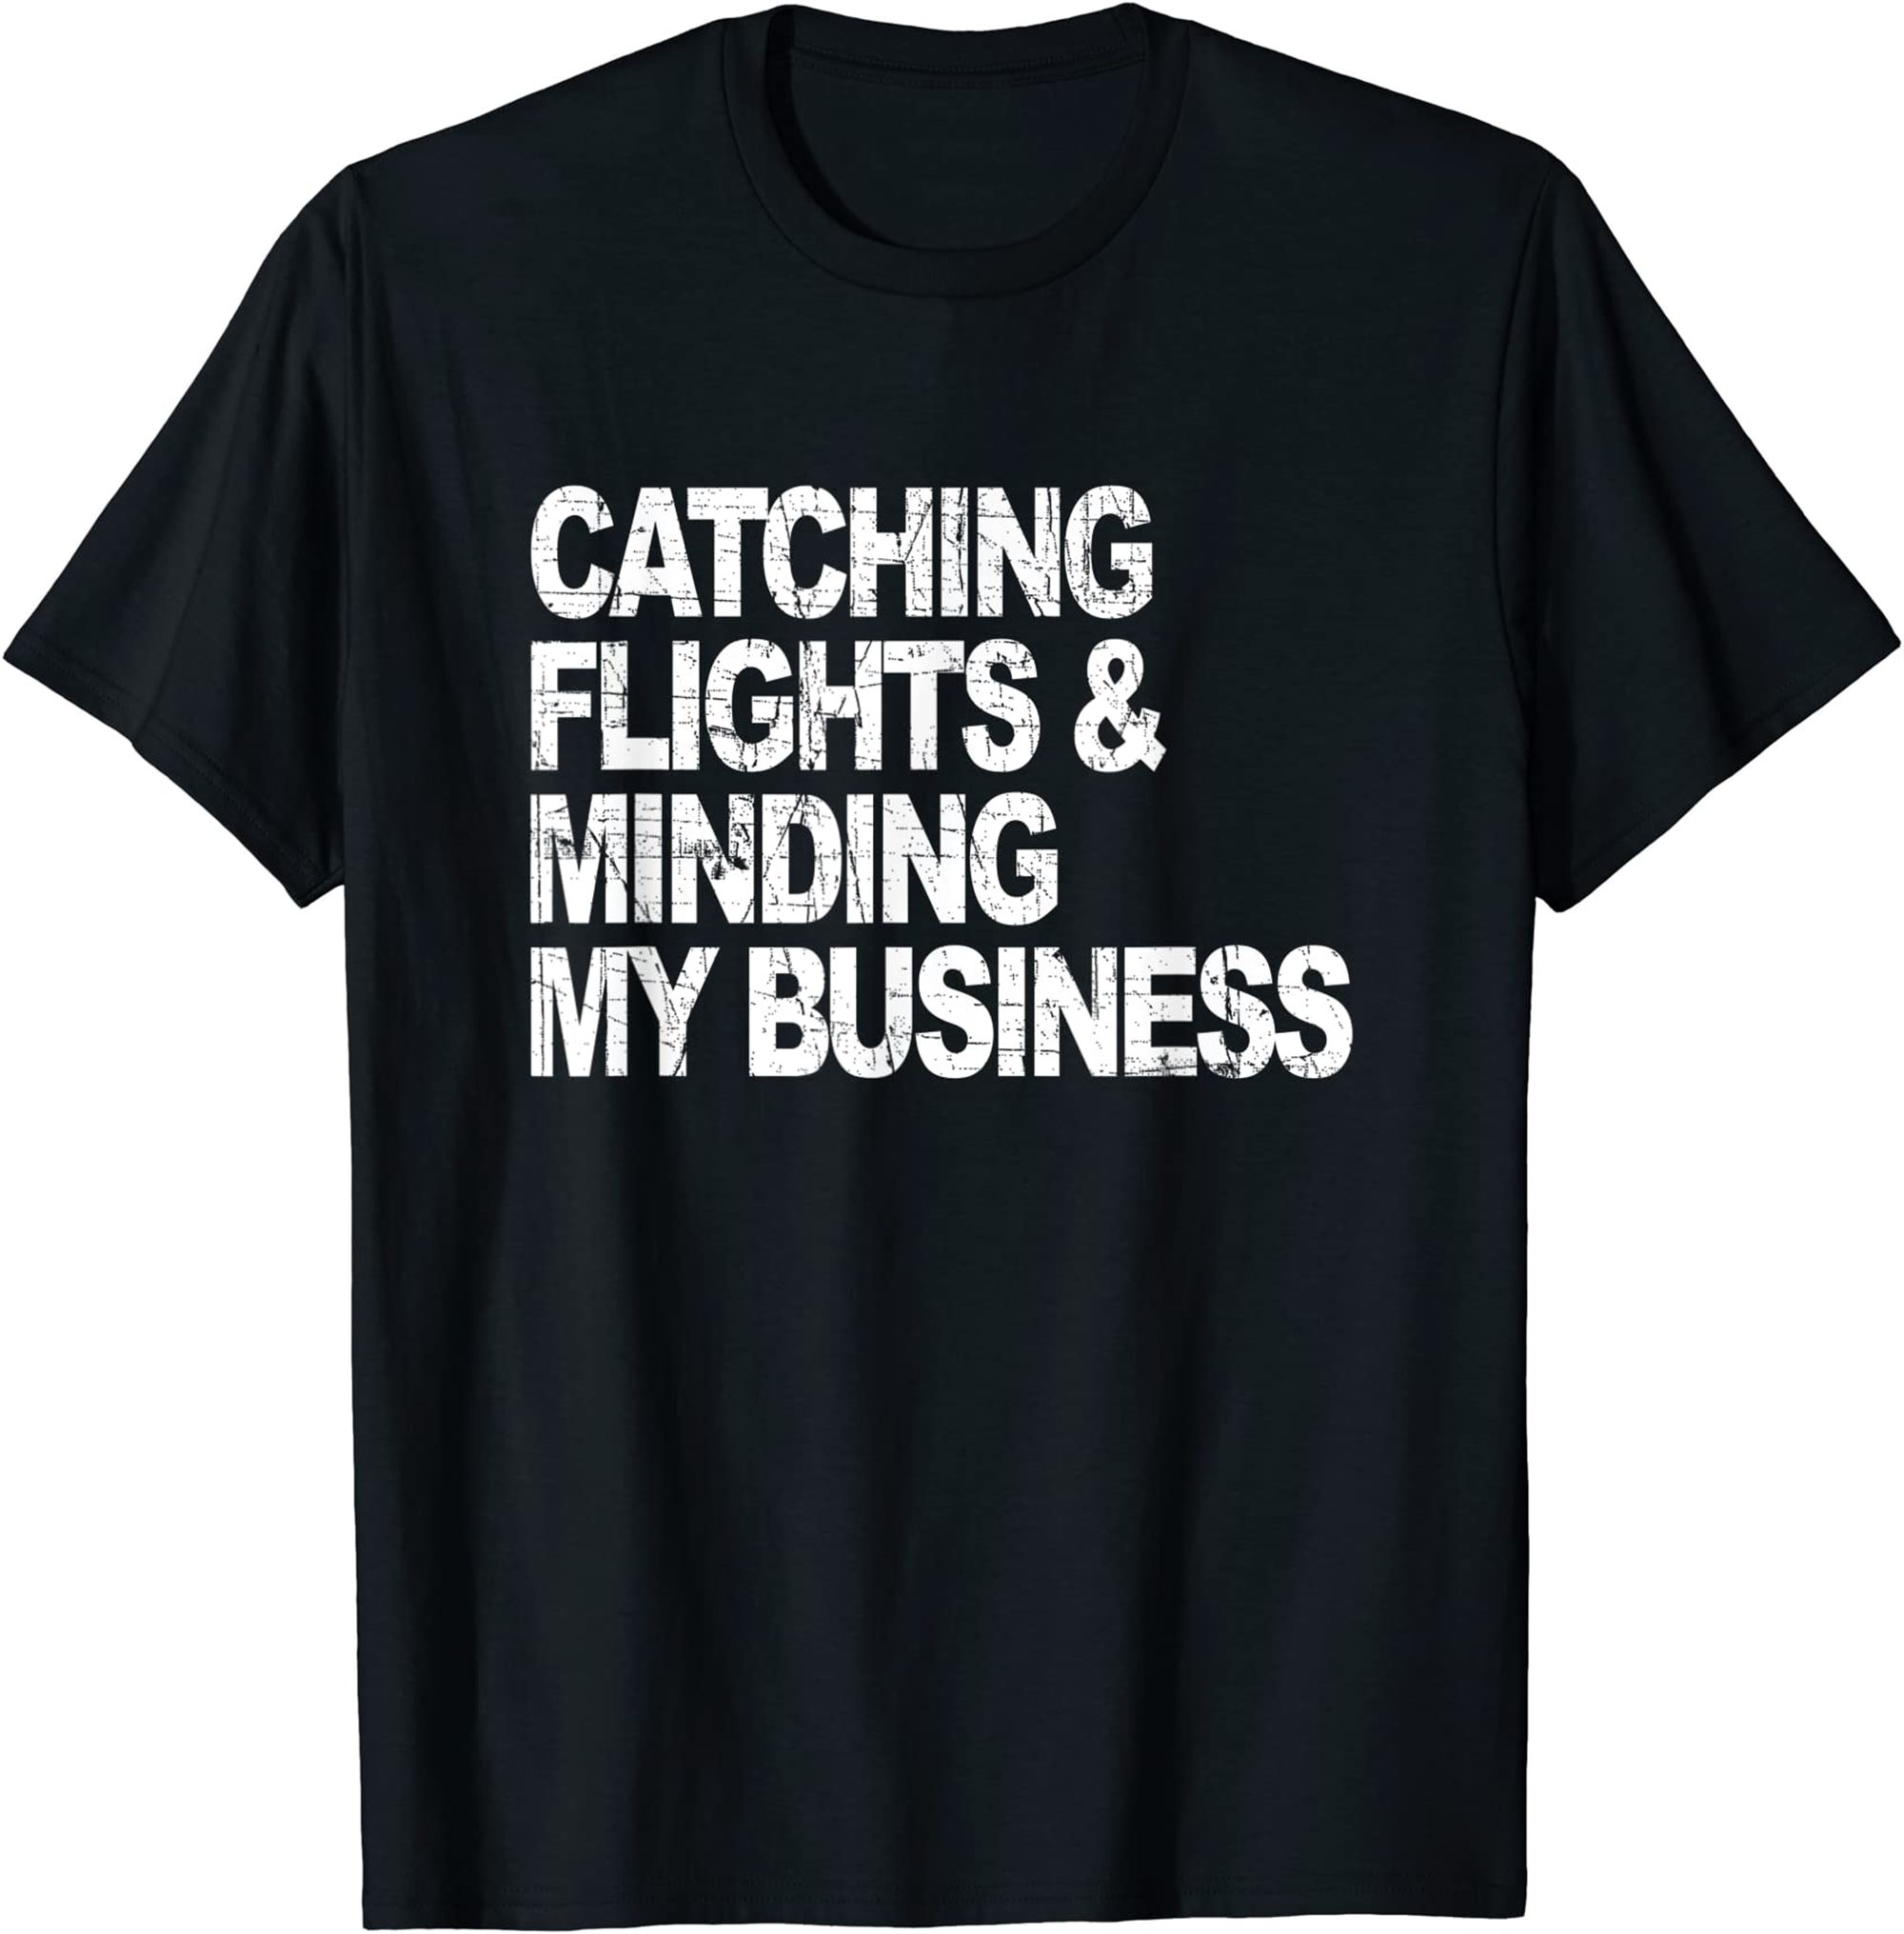 Catching Flights Minding My Business T-shirt Size Up To 5xl